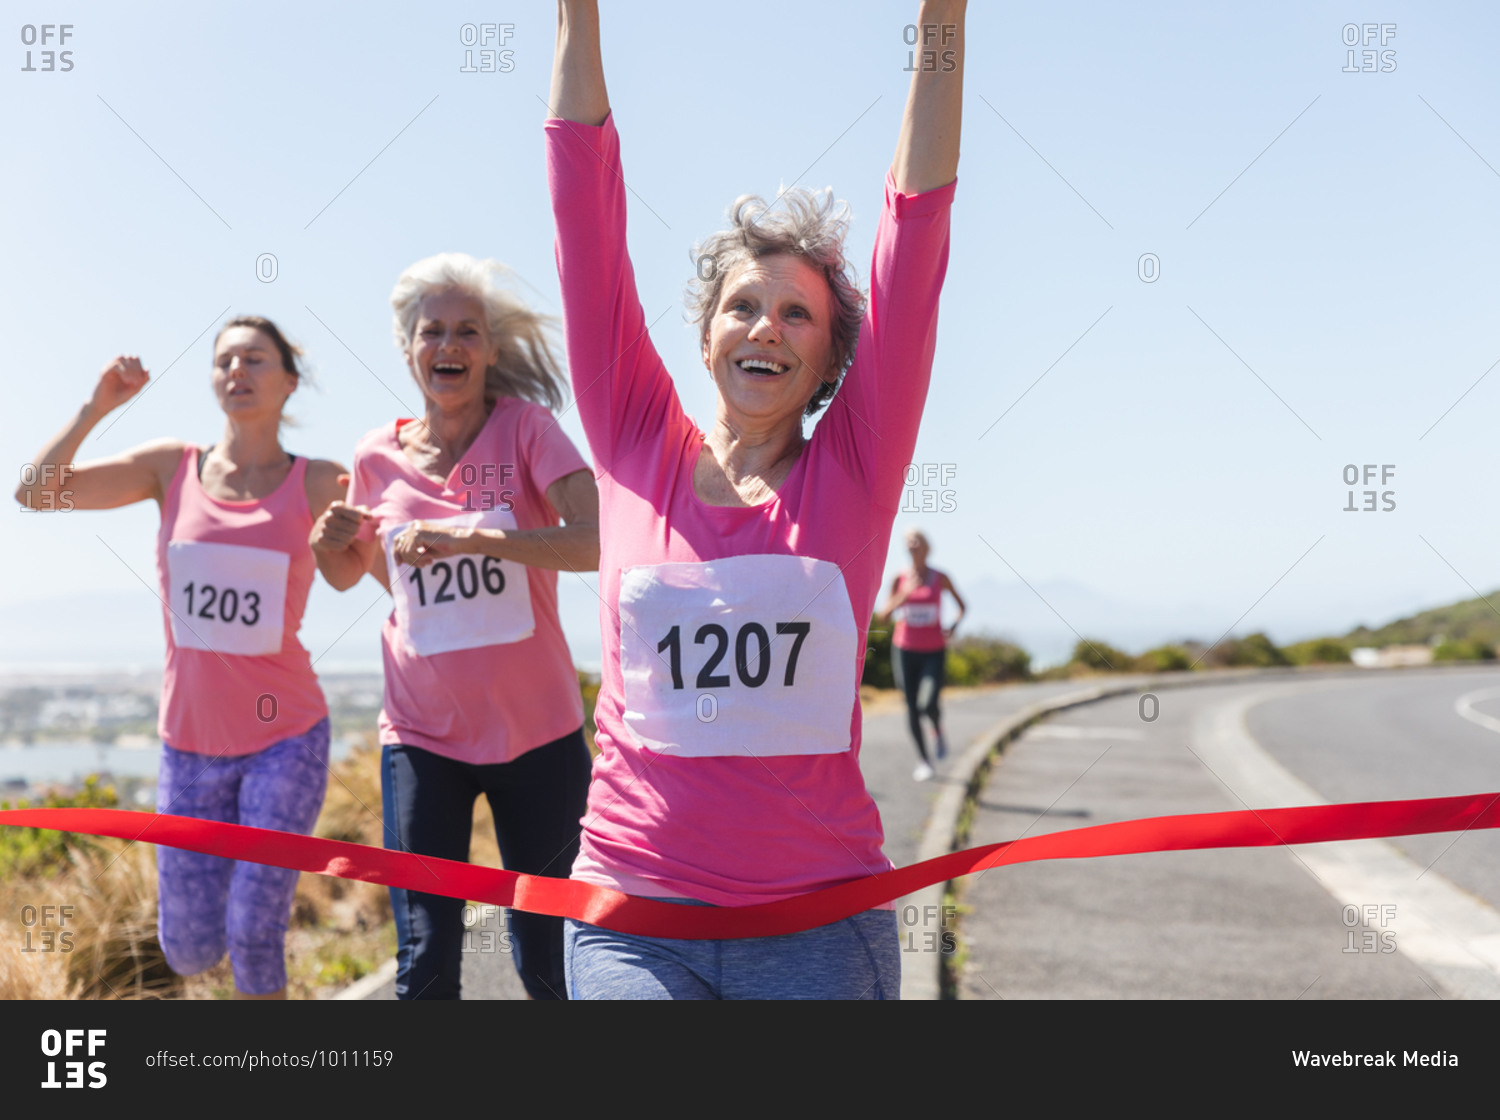 Group of Caucasian female friends enjoying exercising on a sunny day, having running race and wearing numbers, running towards a finish line and celebrating.